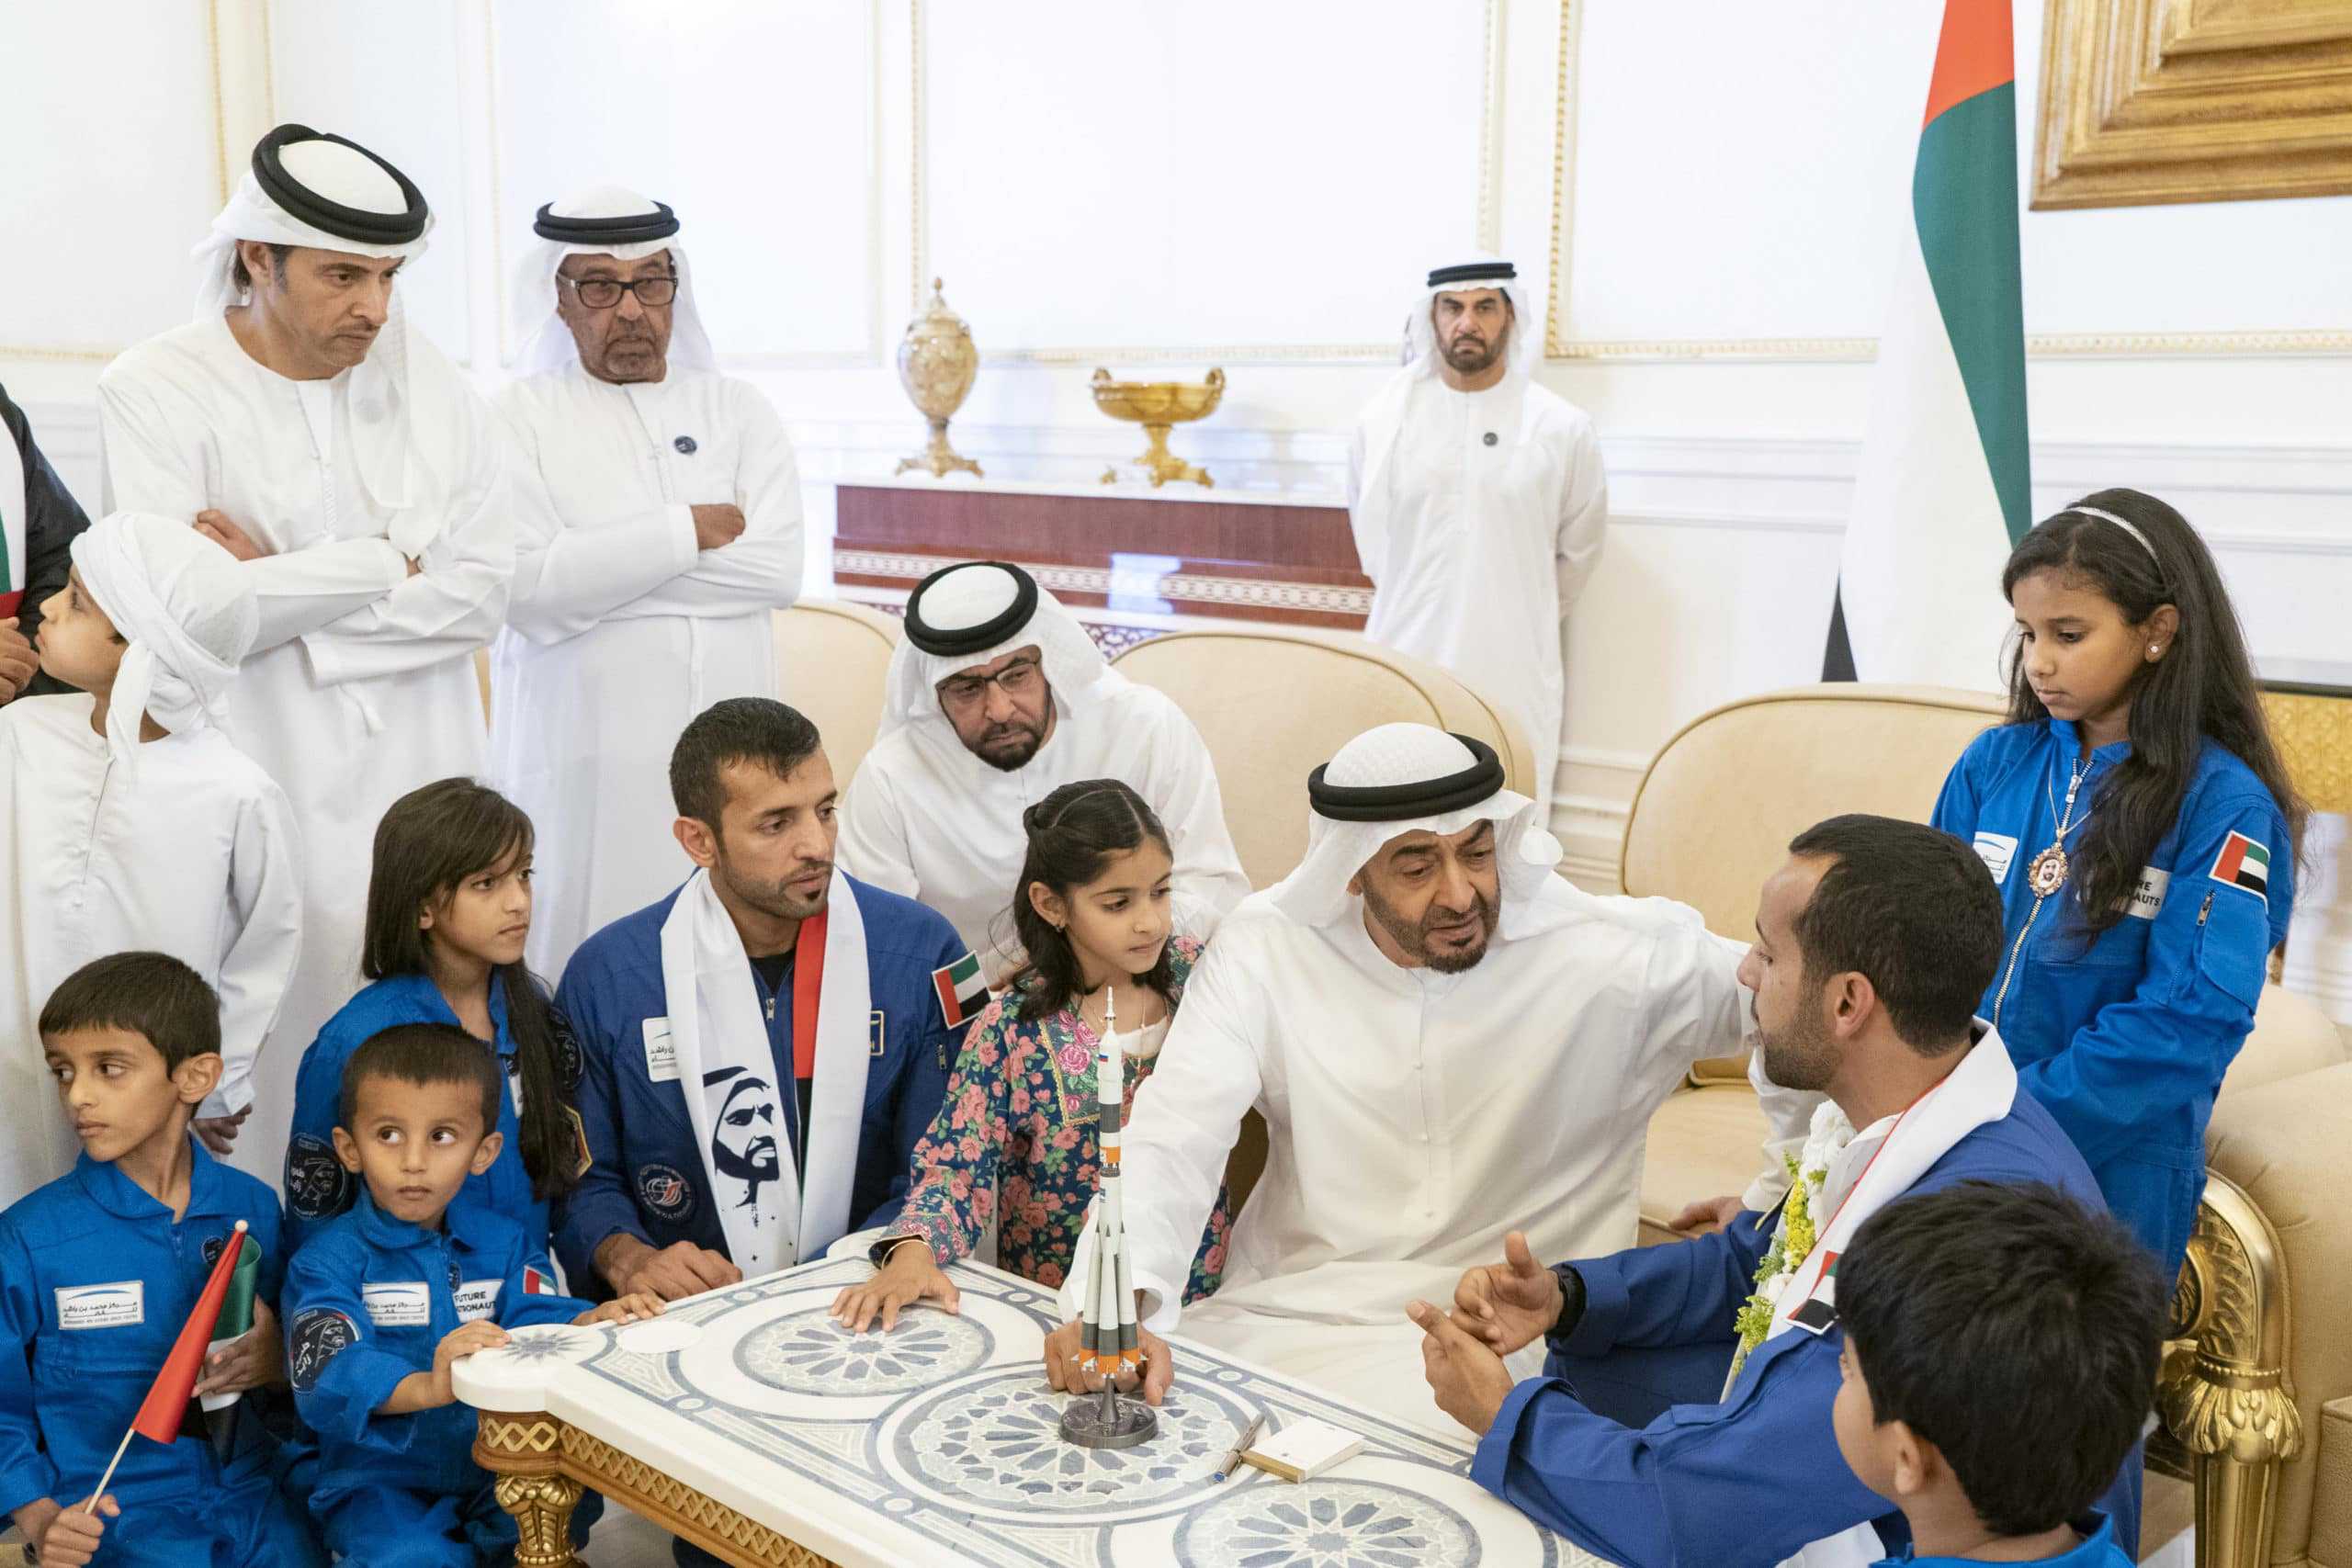 BRSC Commemorates One Year Anniversary of the first Emirati Astronaut’s Launch to the ISS